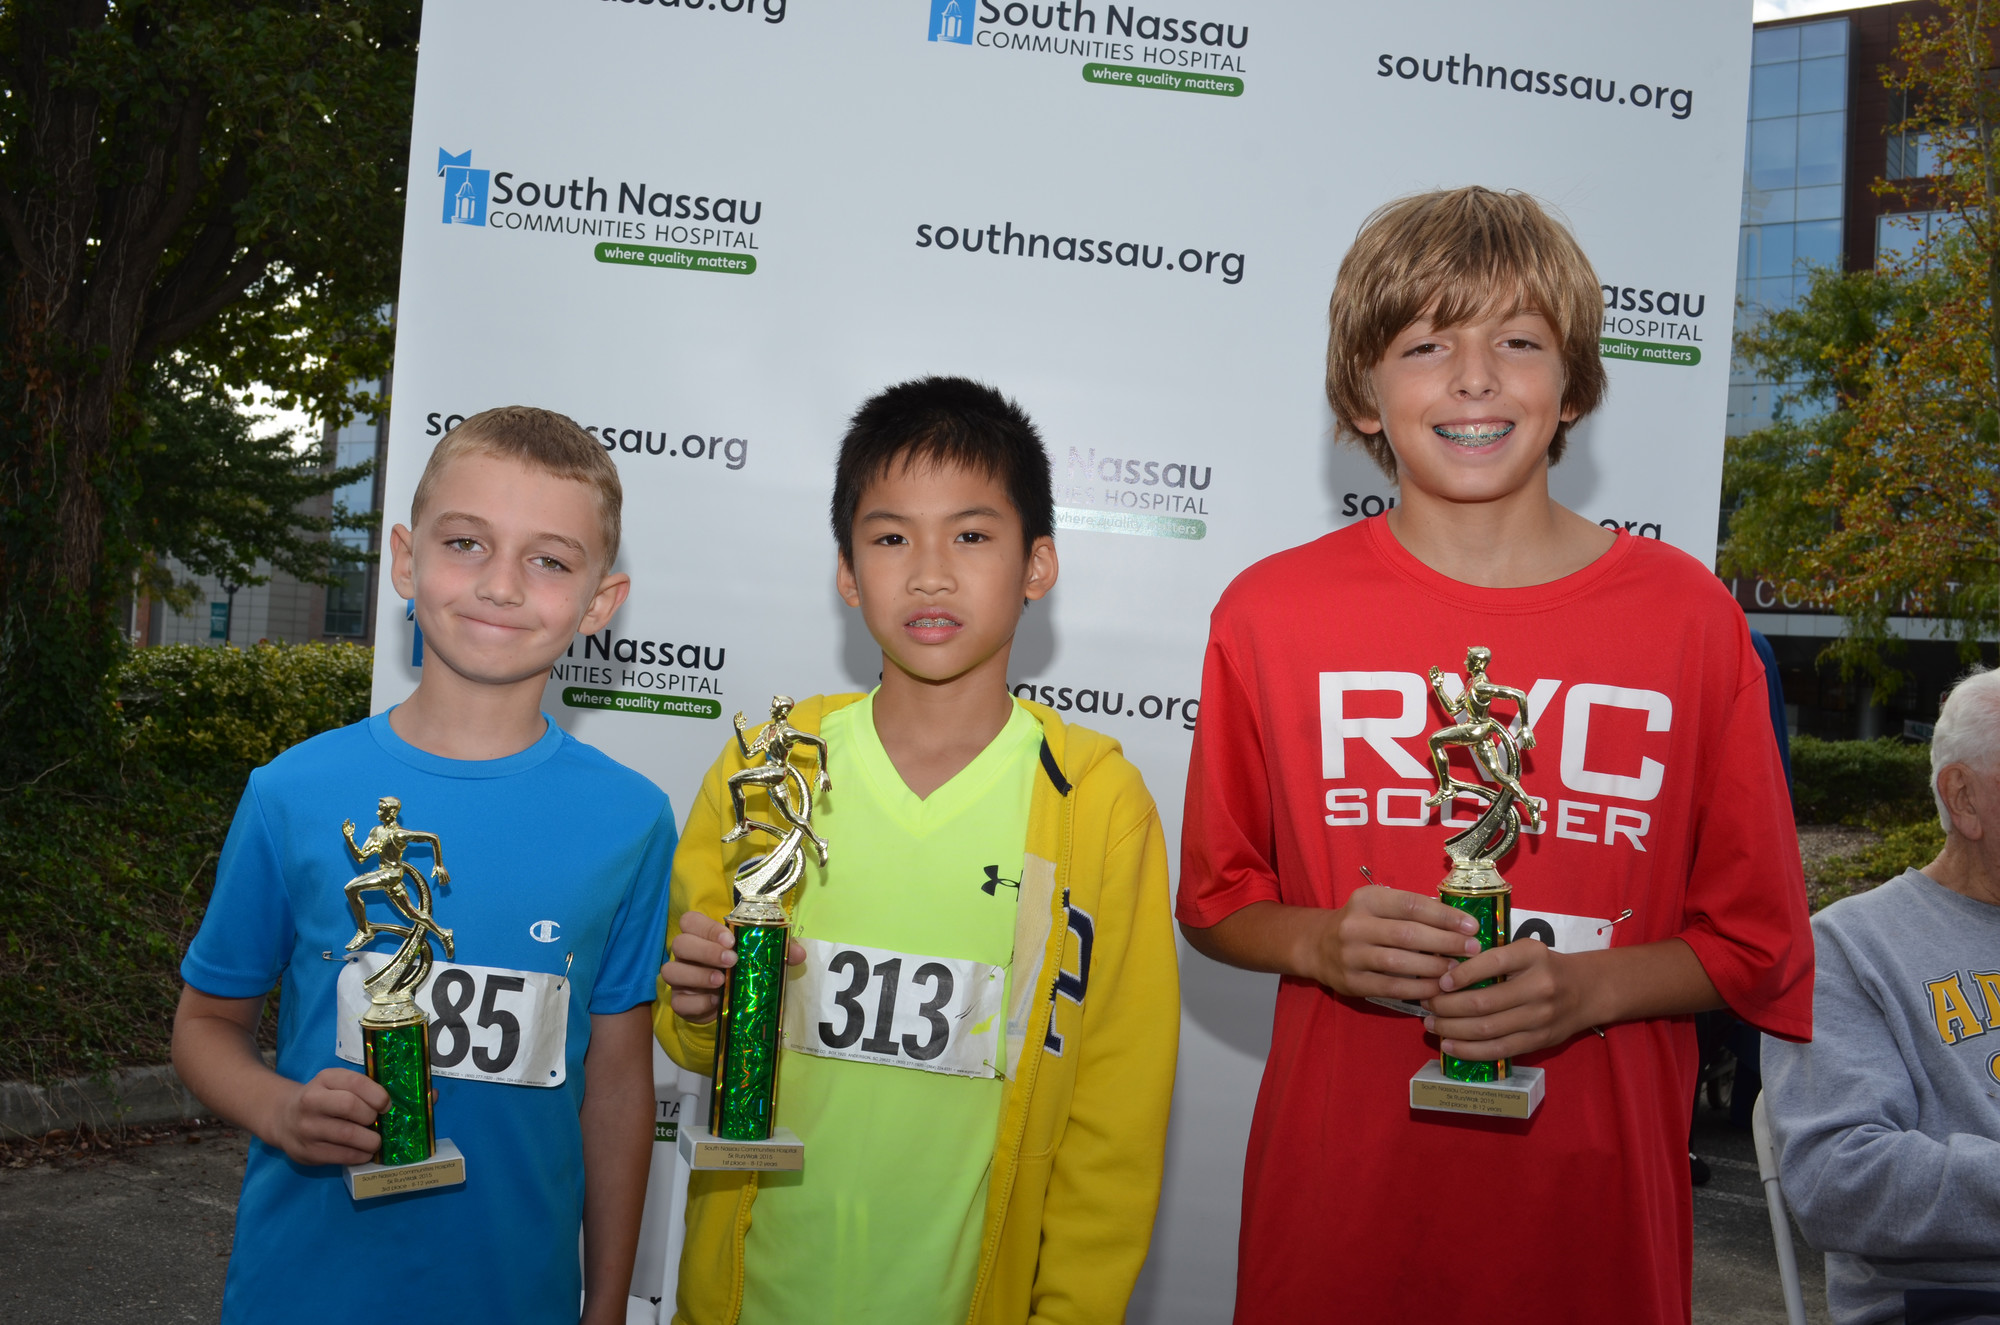 Winners from their age group: From left: Third place William Miller 8, first place Aidan Ke 9 and second place Owen Mraz 12.